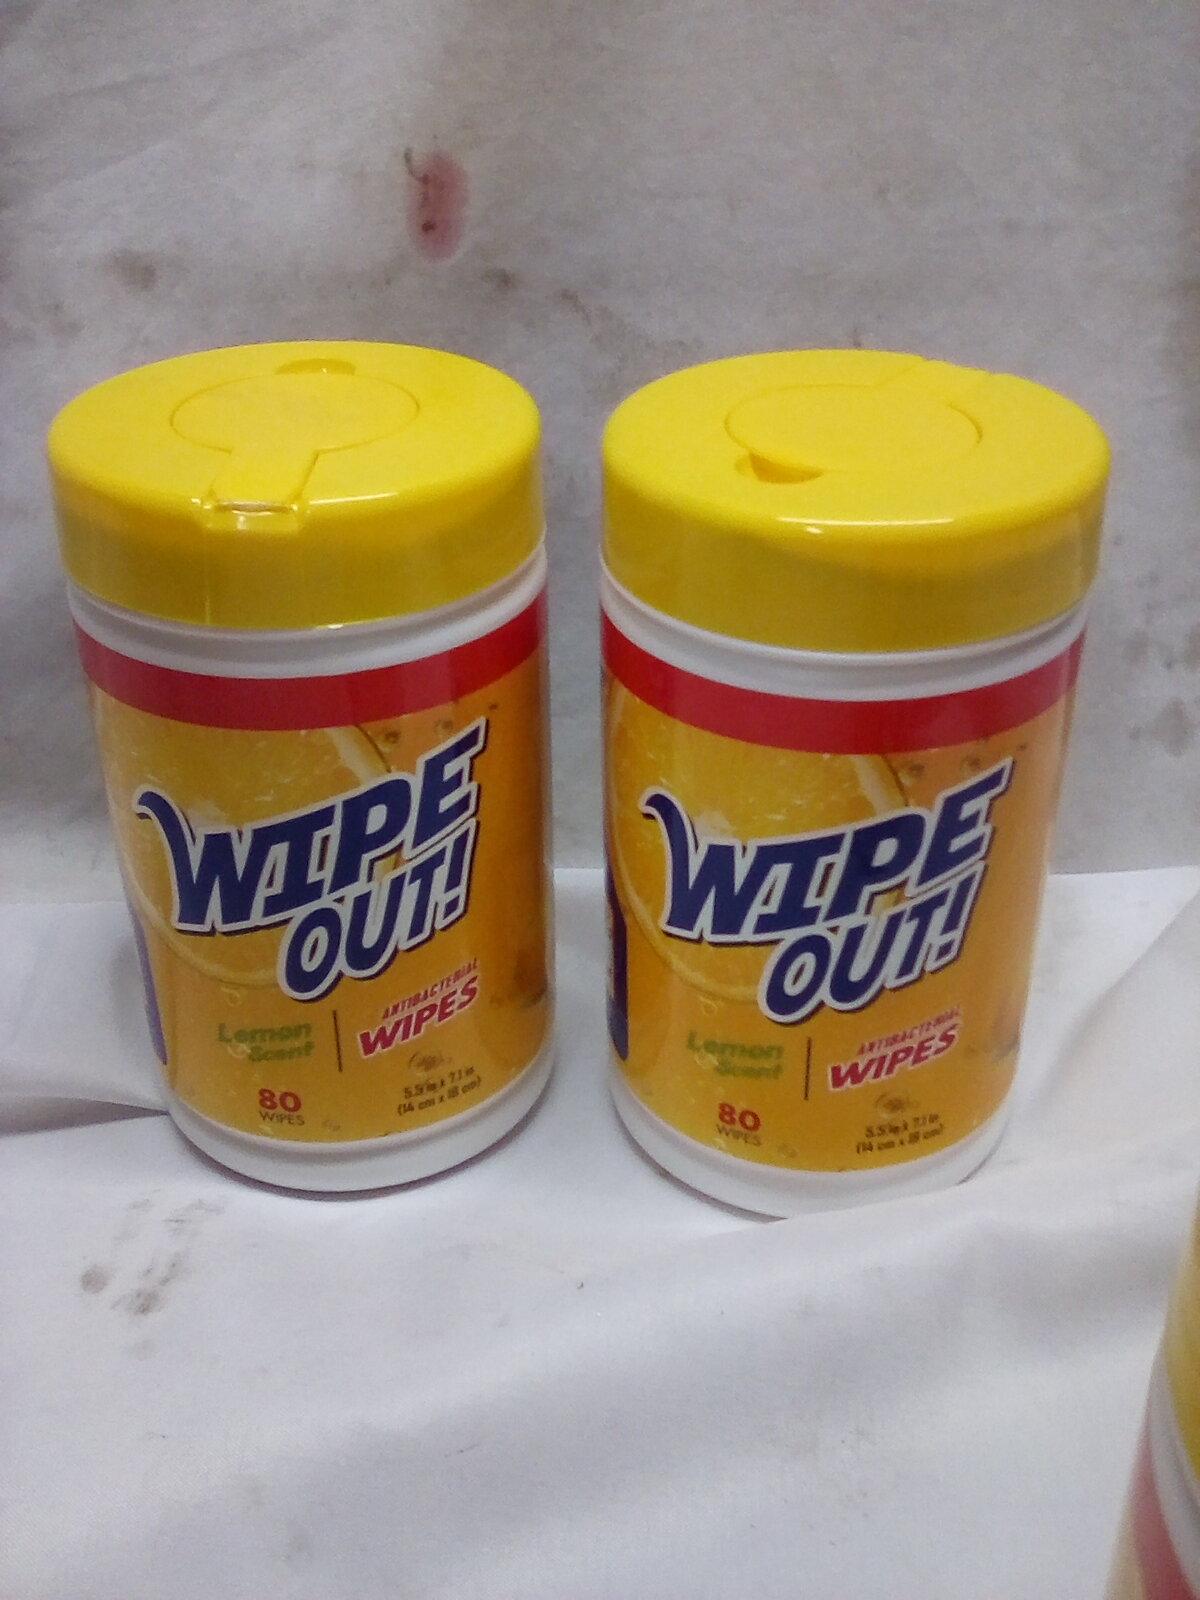 Wipe Out Lemon Scented Antibacterial Wipes. Qty 2- 80 Packs.